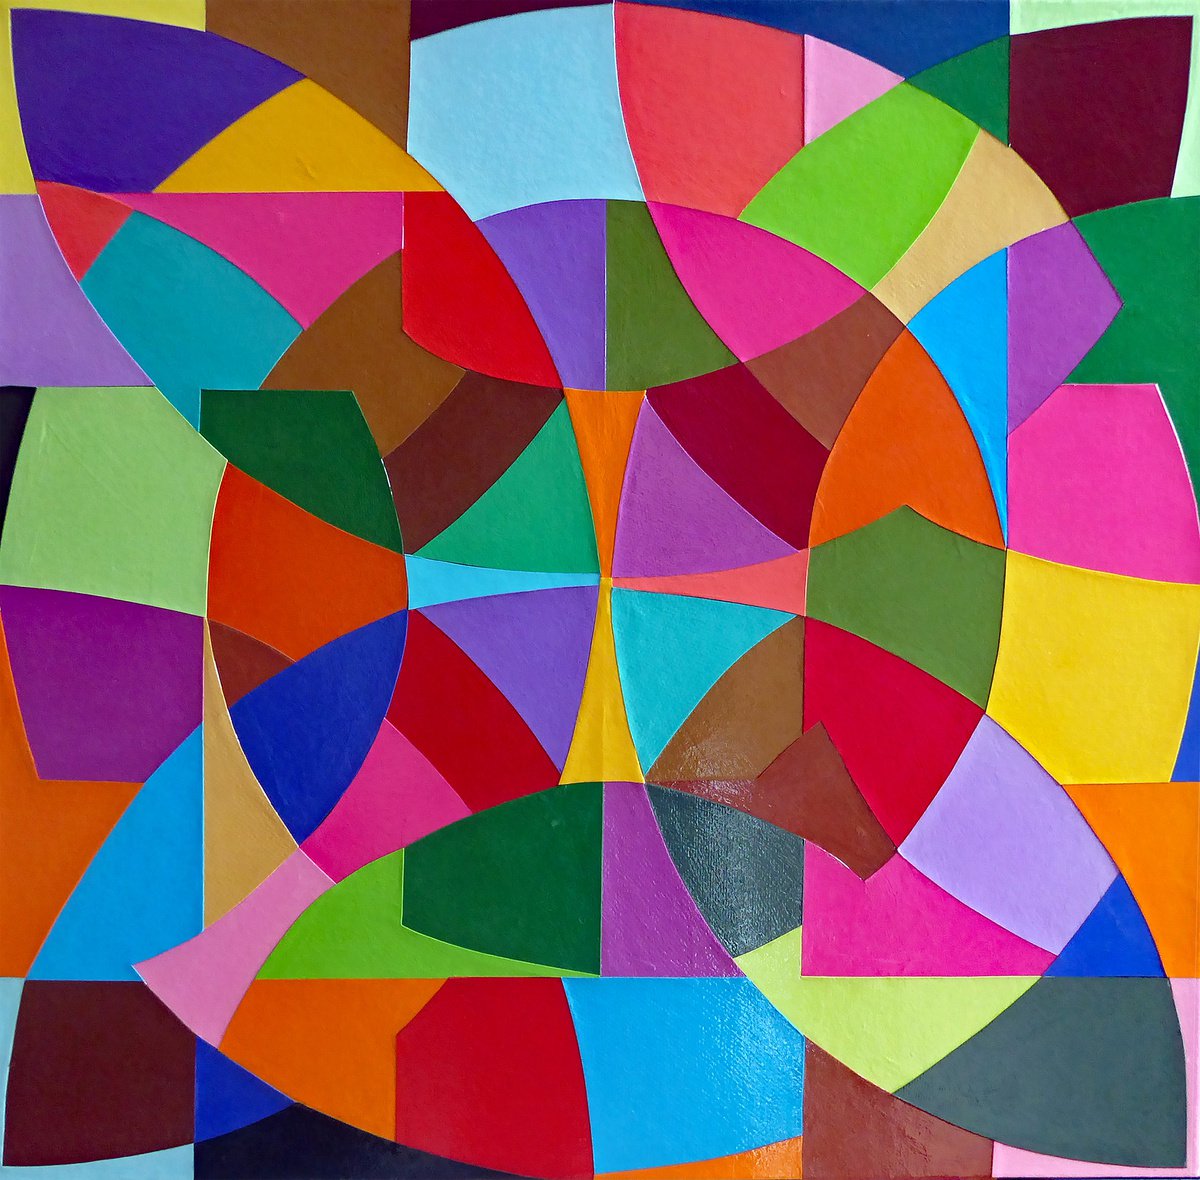 CIRCLE WITHIN CIRCLE WITHIN SQUARE by Stephen Conroy